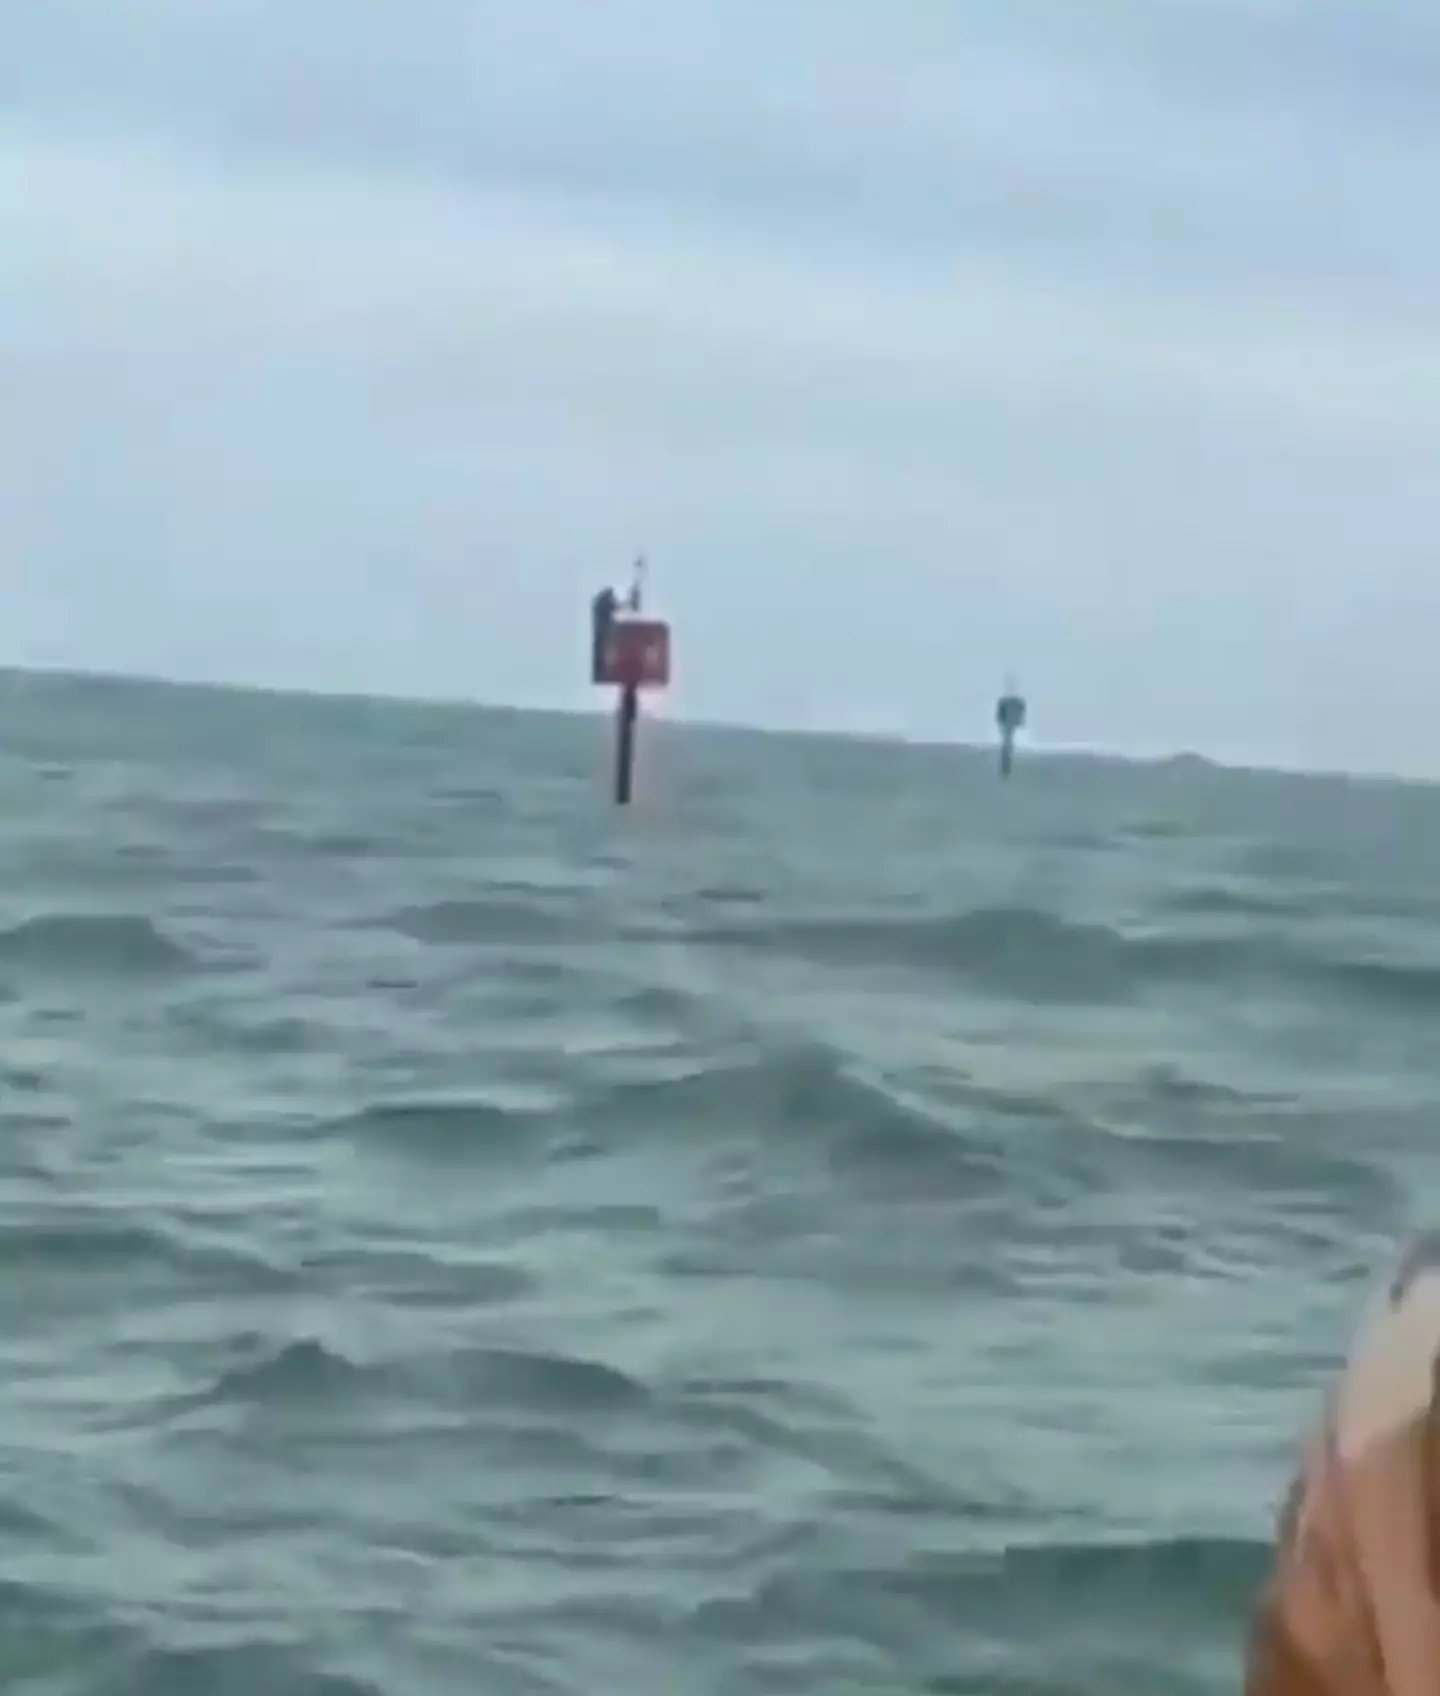 David Soares survived by holding on to a signal buoy.